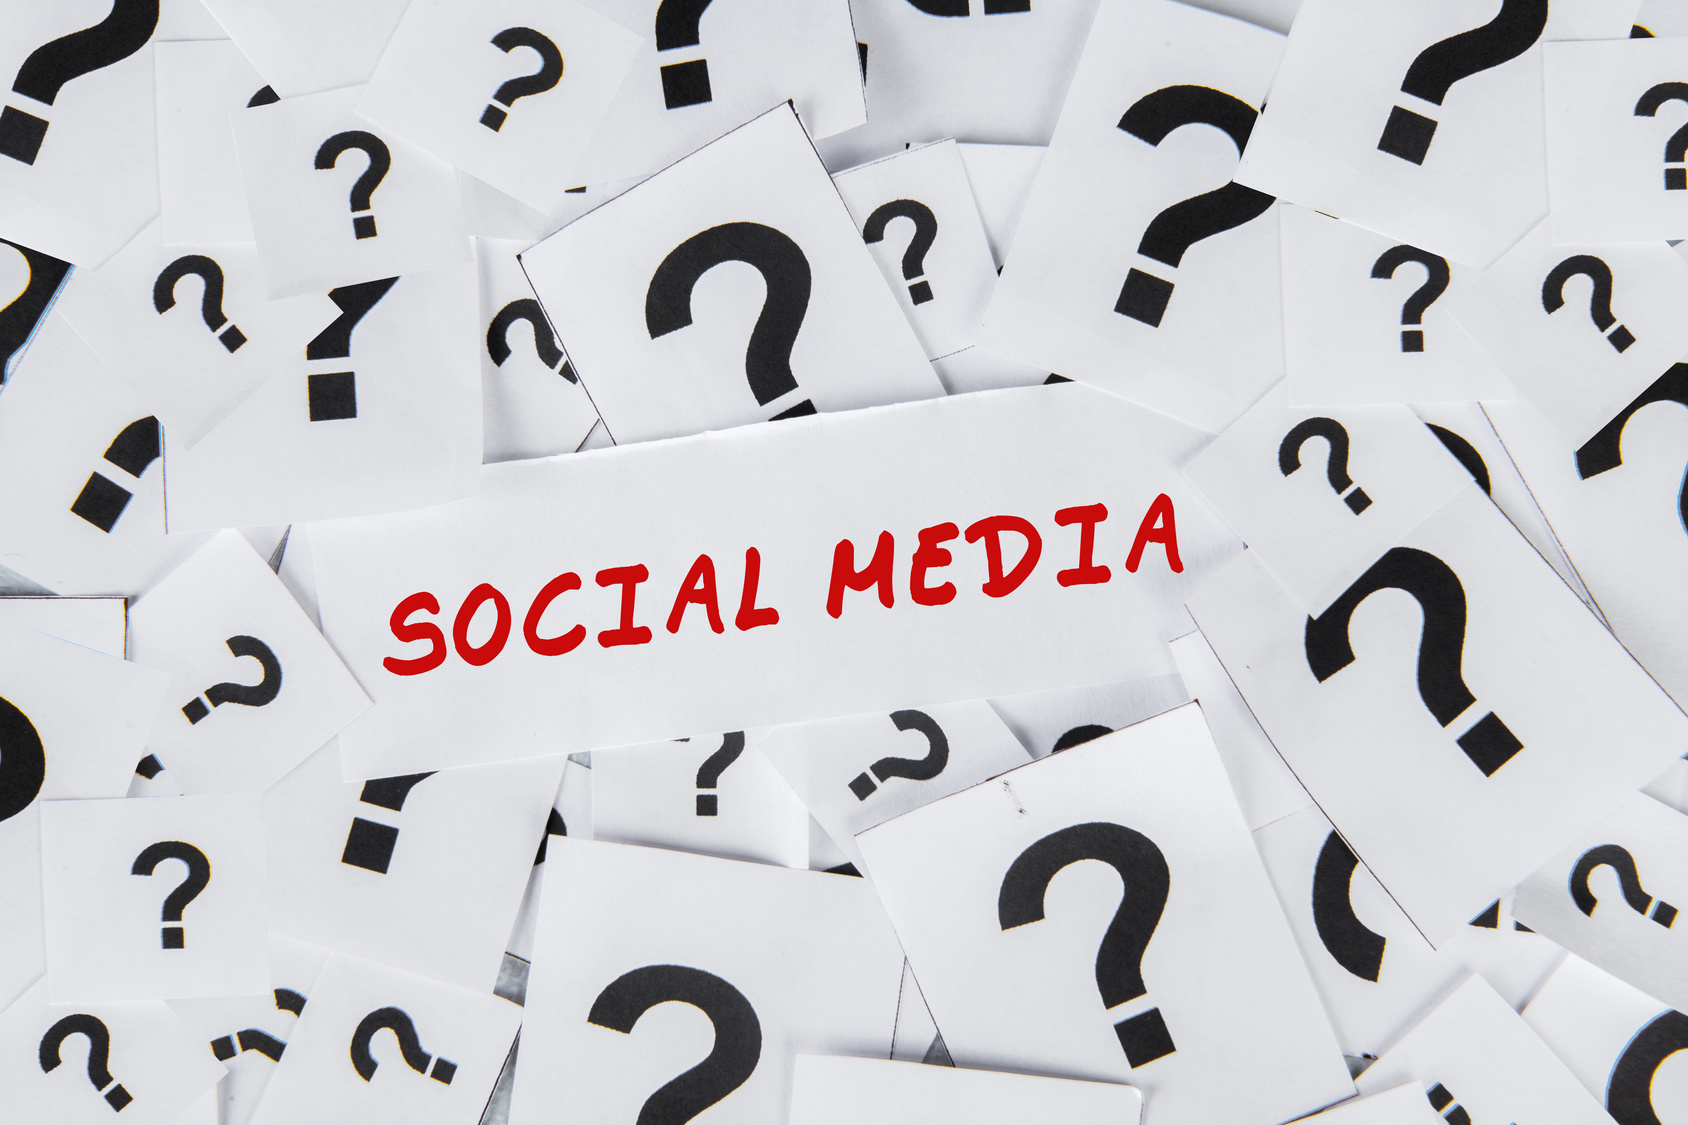 Social Media: How the Personal Affects the Professional